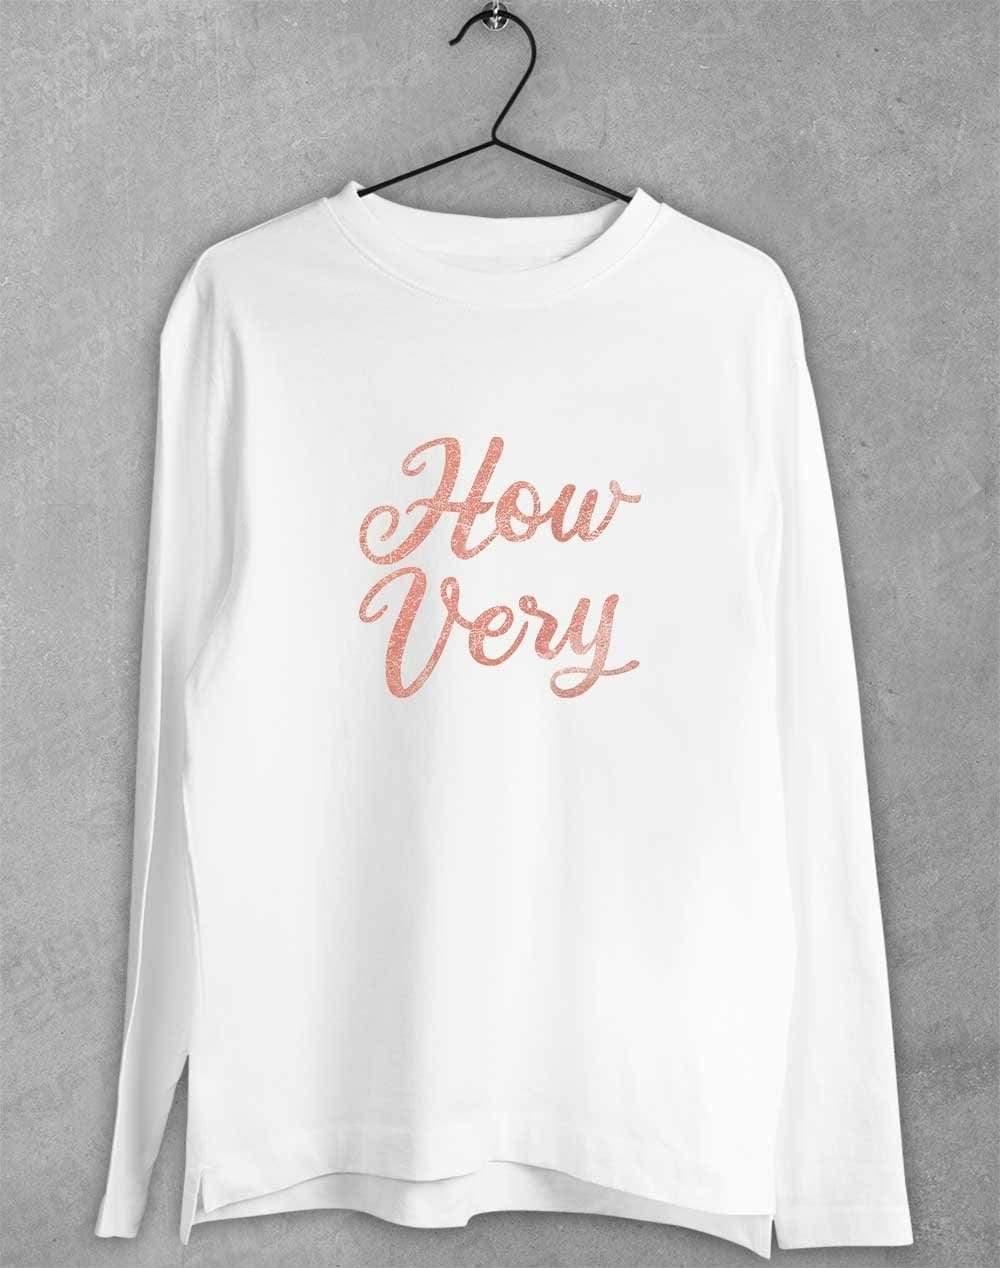 How Very Long Sleeve T-Shirt S / White  - Off World Tees